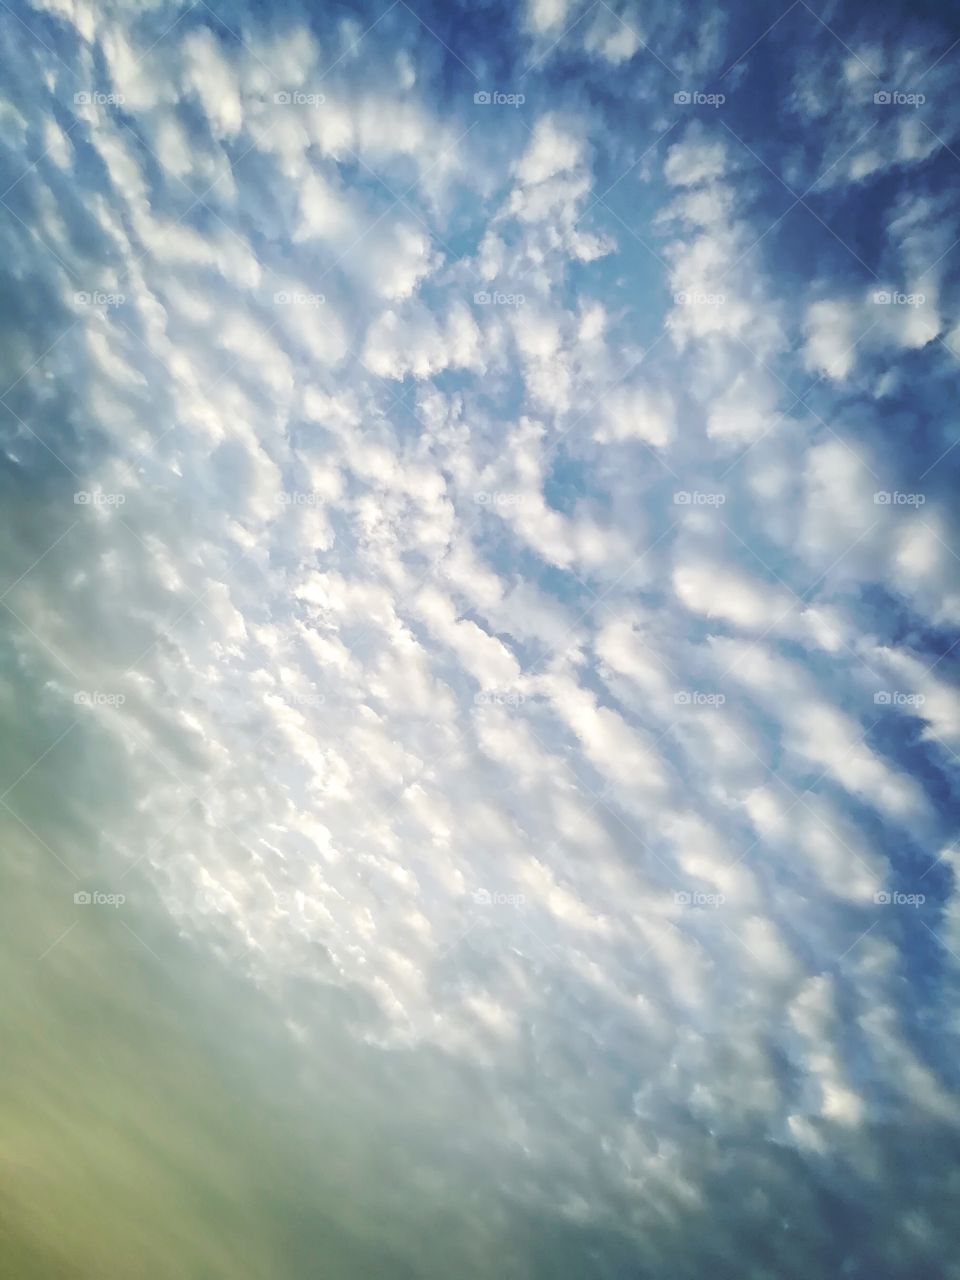 Look up at the sky. Today cloud is so beautiful.